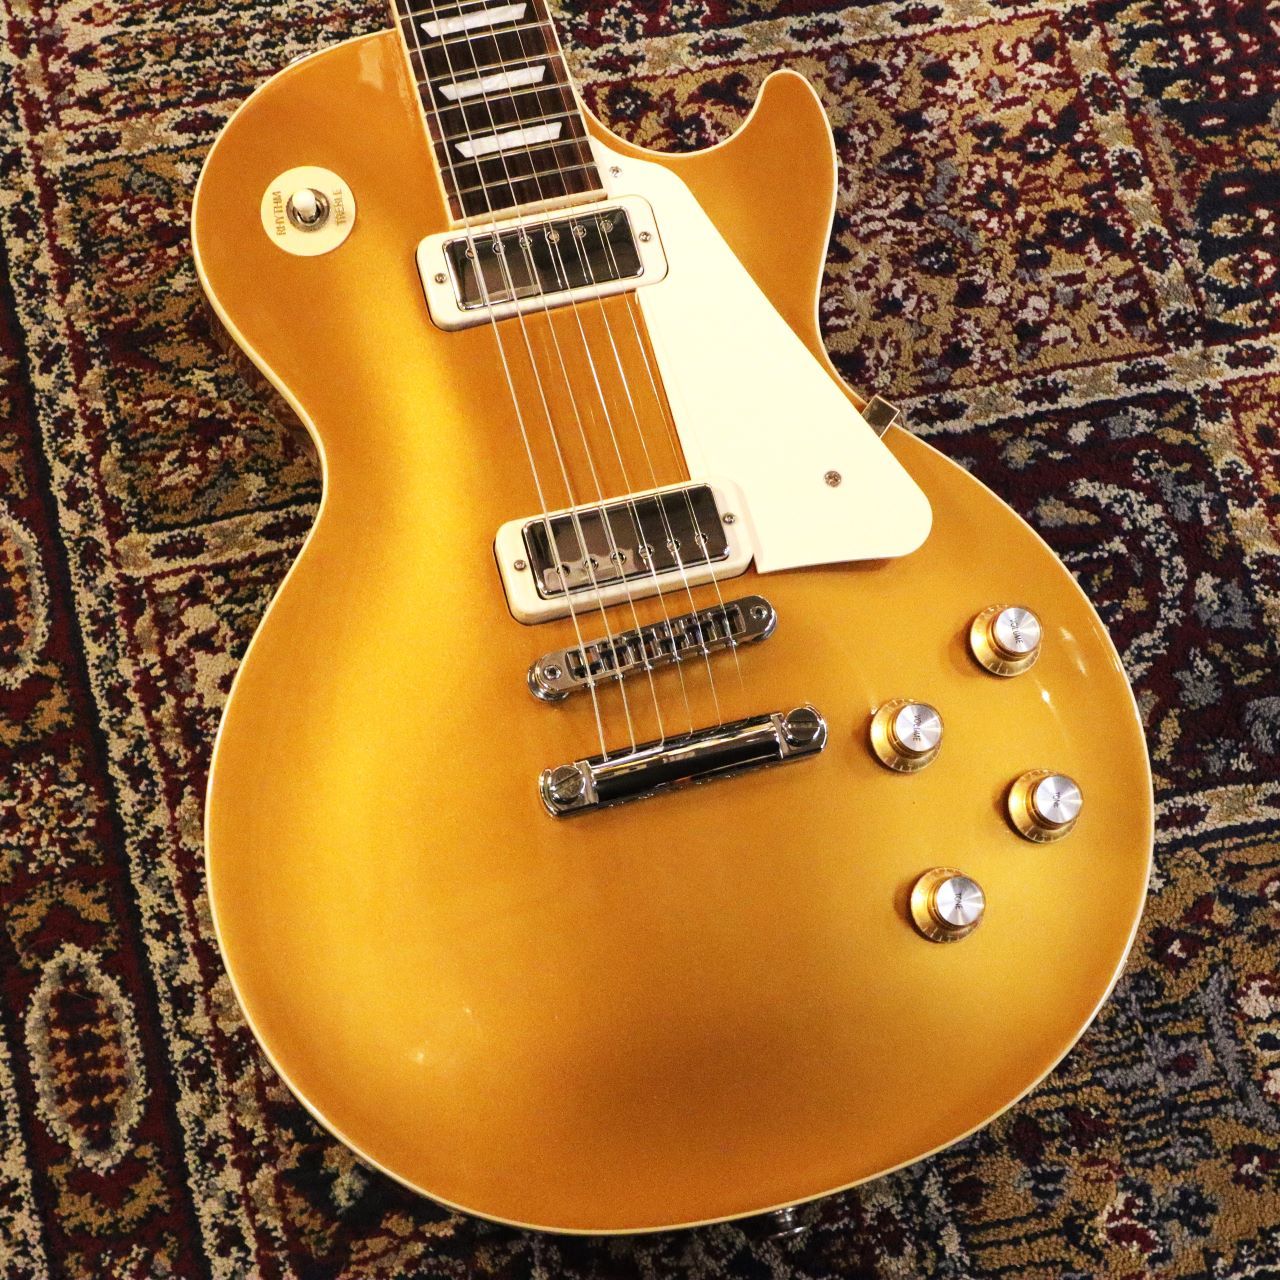 Gibson Les Paul Deluxe 70s Gold Top #216530166 [4.54kg][ミニ